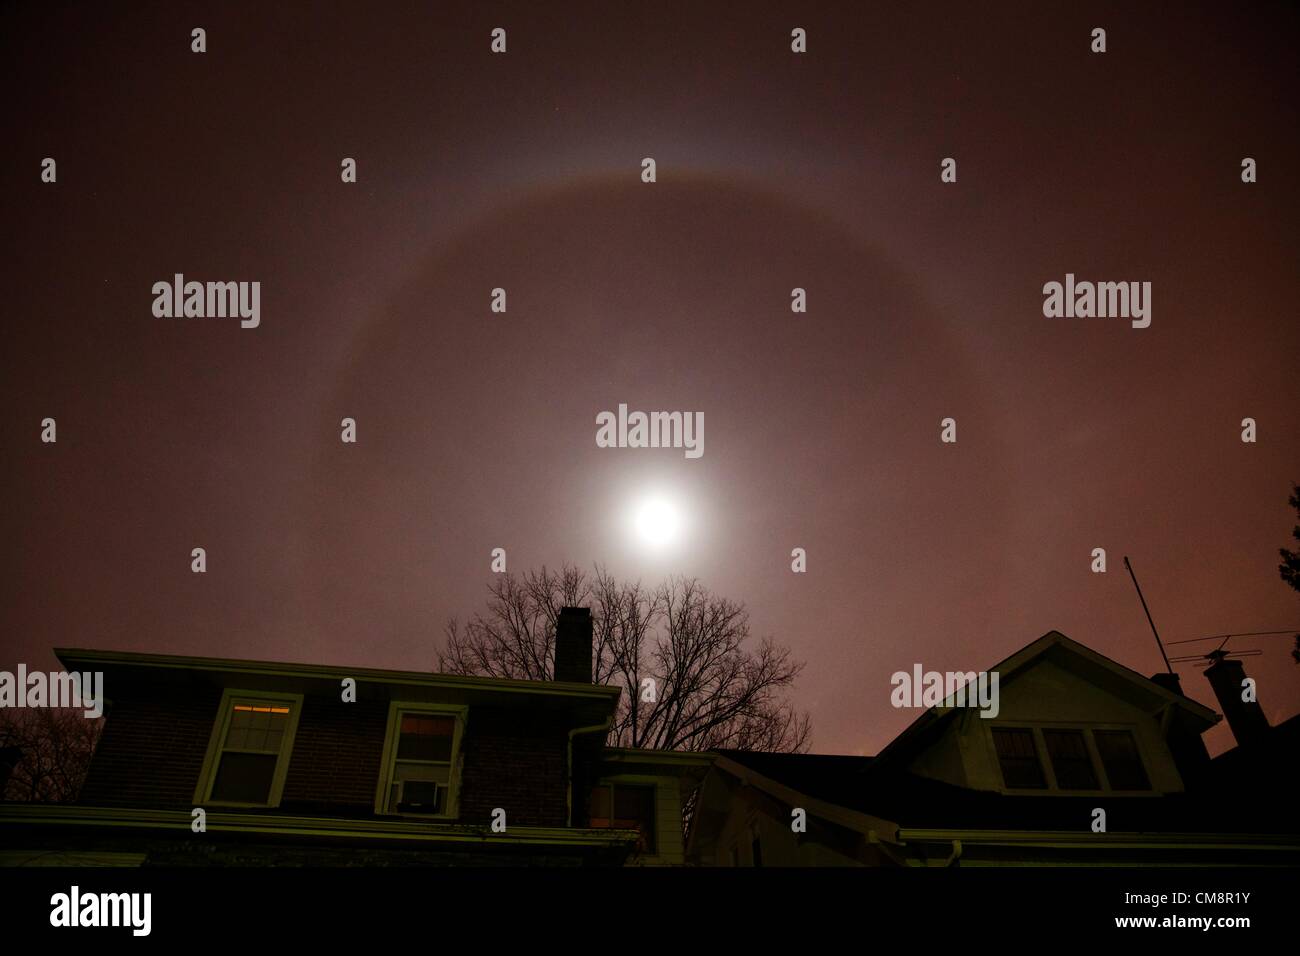 Oak Park, Illinois, USA. Monday 29th October 2012. Ice crystals of cirrus clouds on the fringes of Hurricane Sandy create a ring around the full moon. The moon's high tide is exacerbating the storm surge resulting in serious flooding on the east coast of the USA. Stock Photo